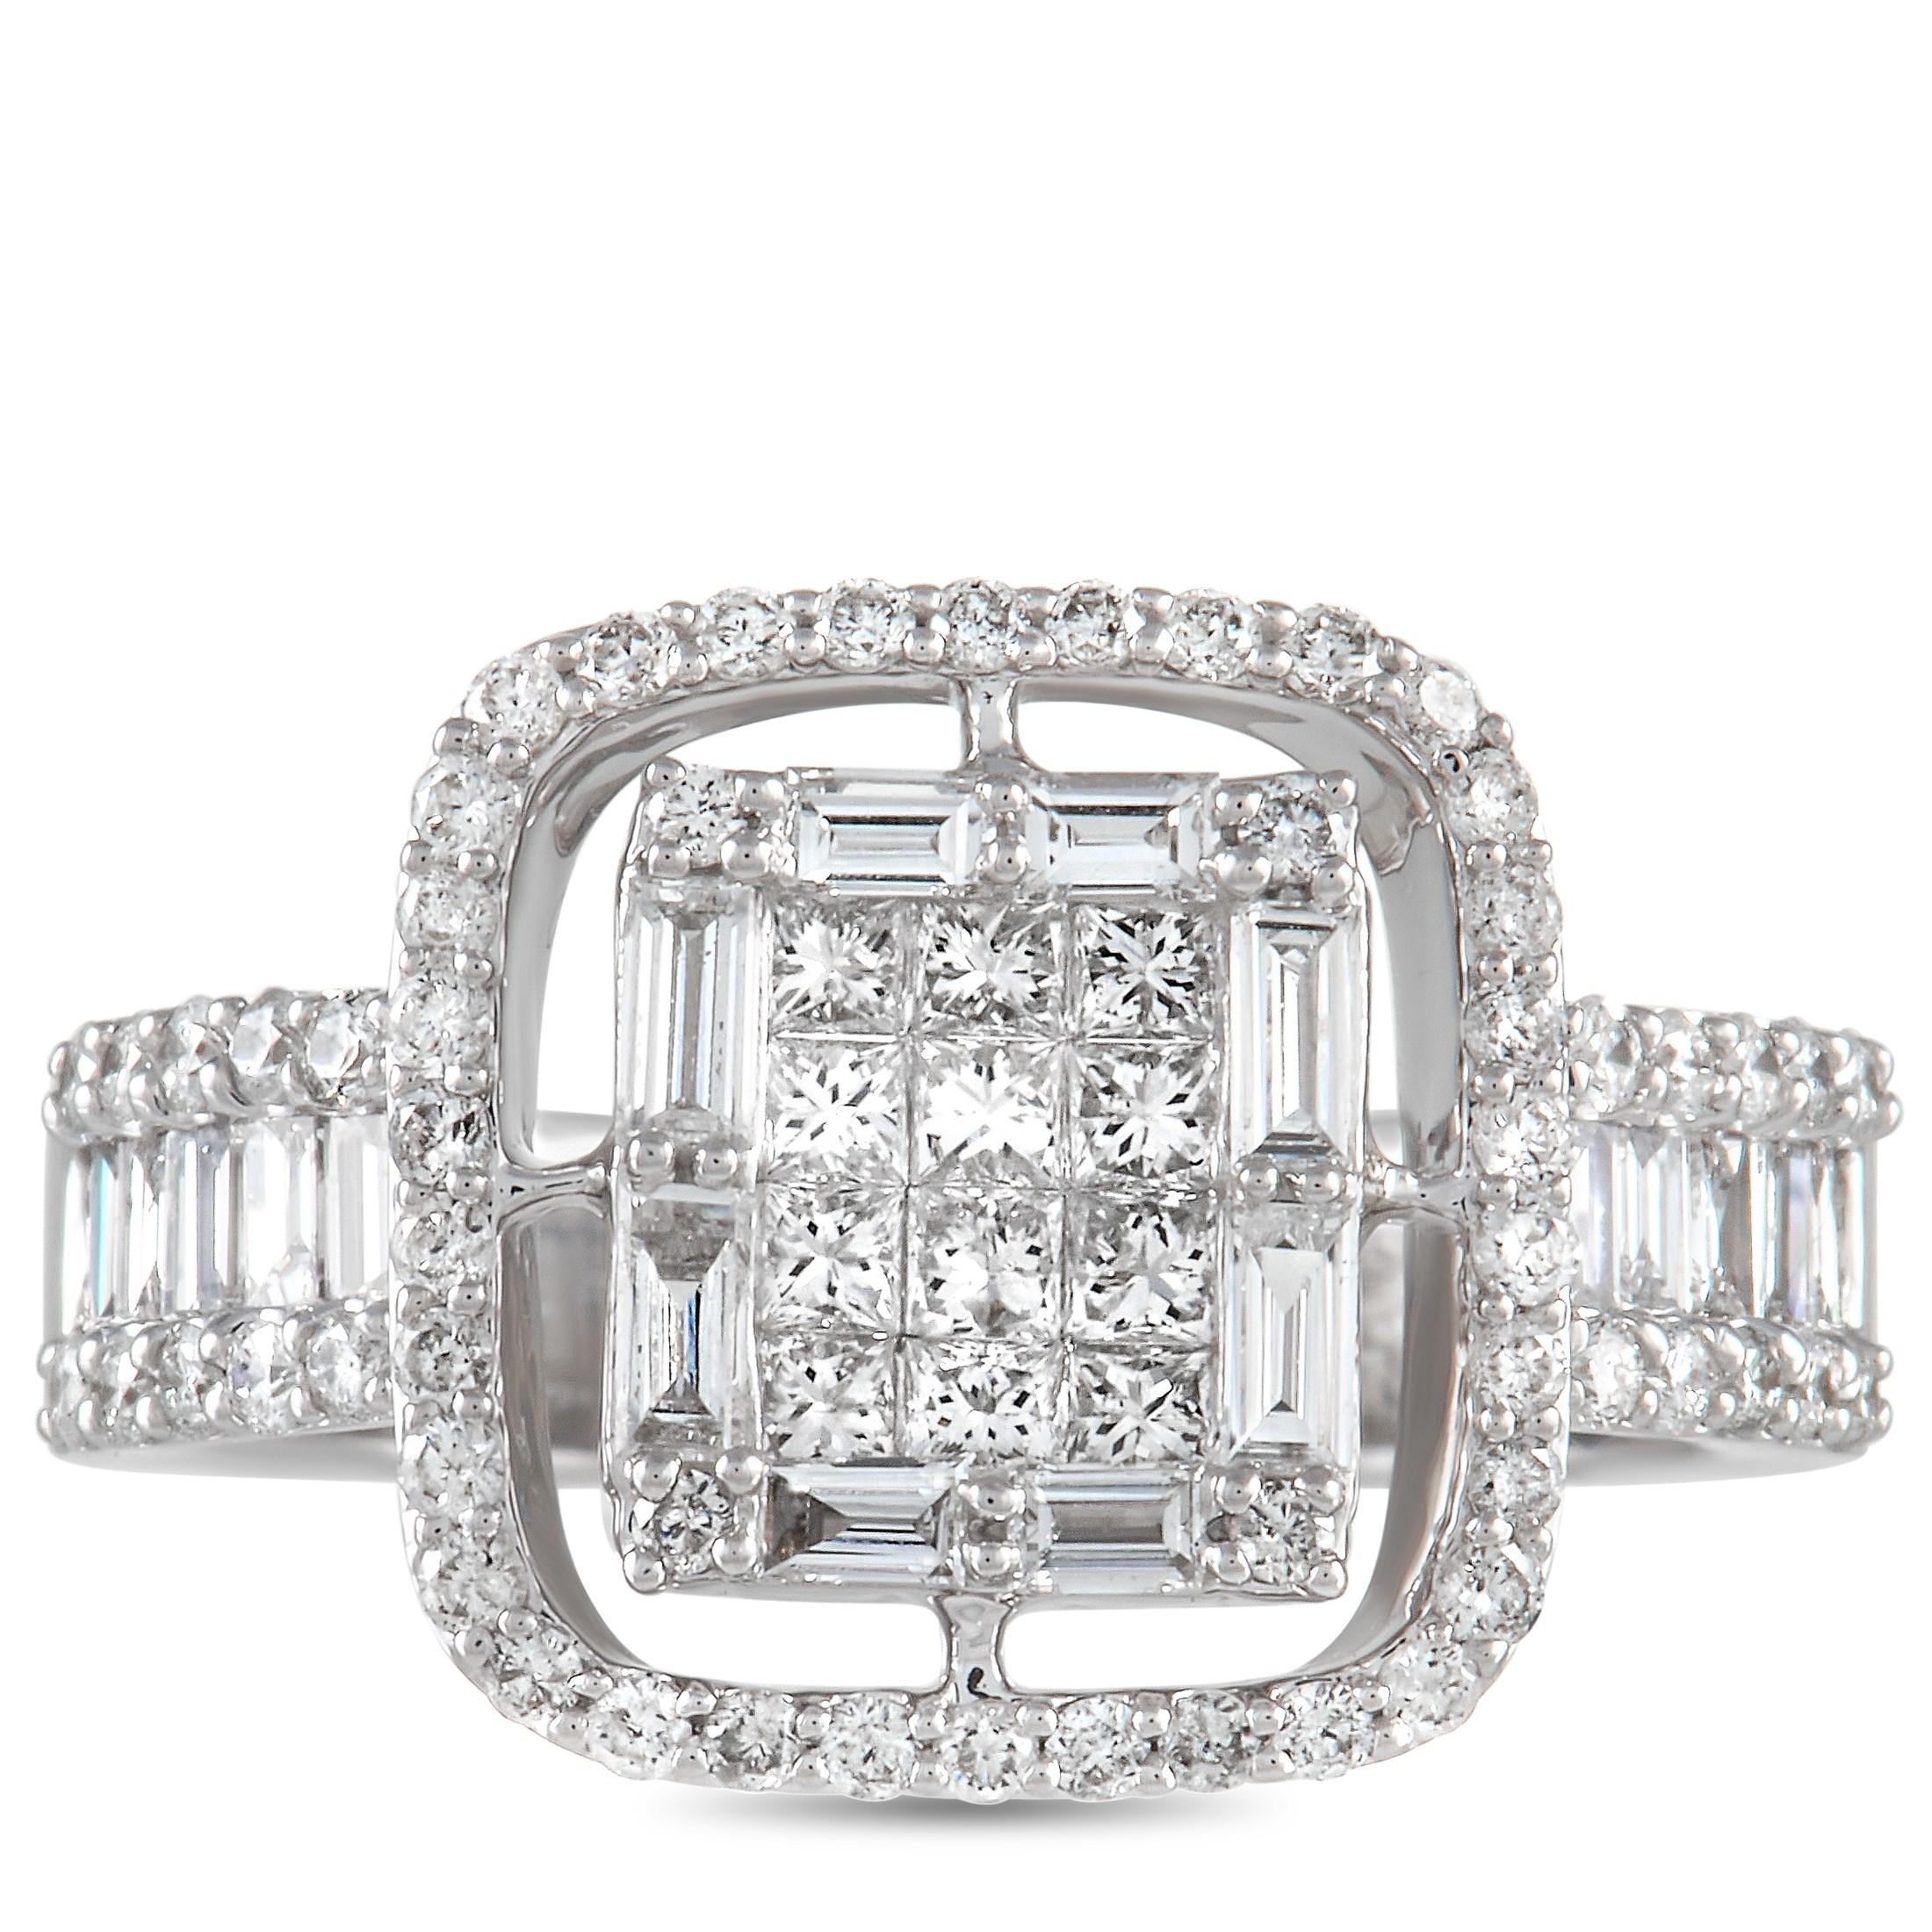 LB Exclusive 14K White Gold 1.37 Ct Diamond Ring In New Condition For Sale In Southampton, PA